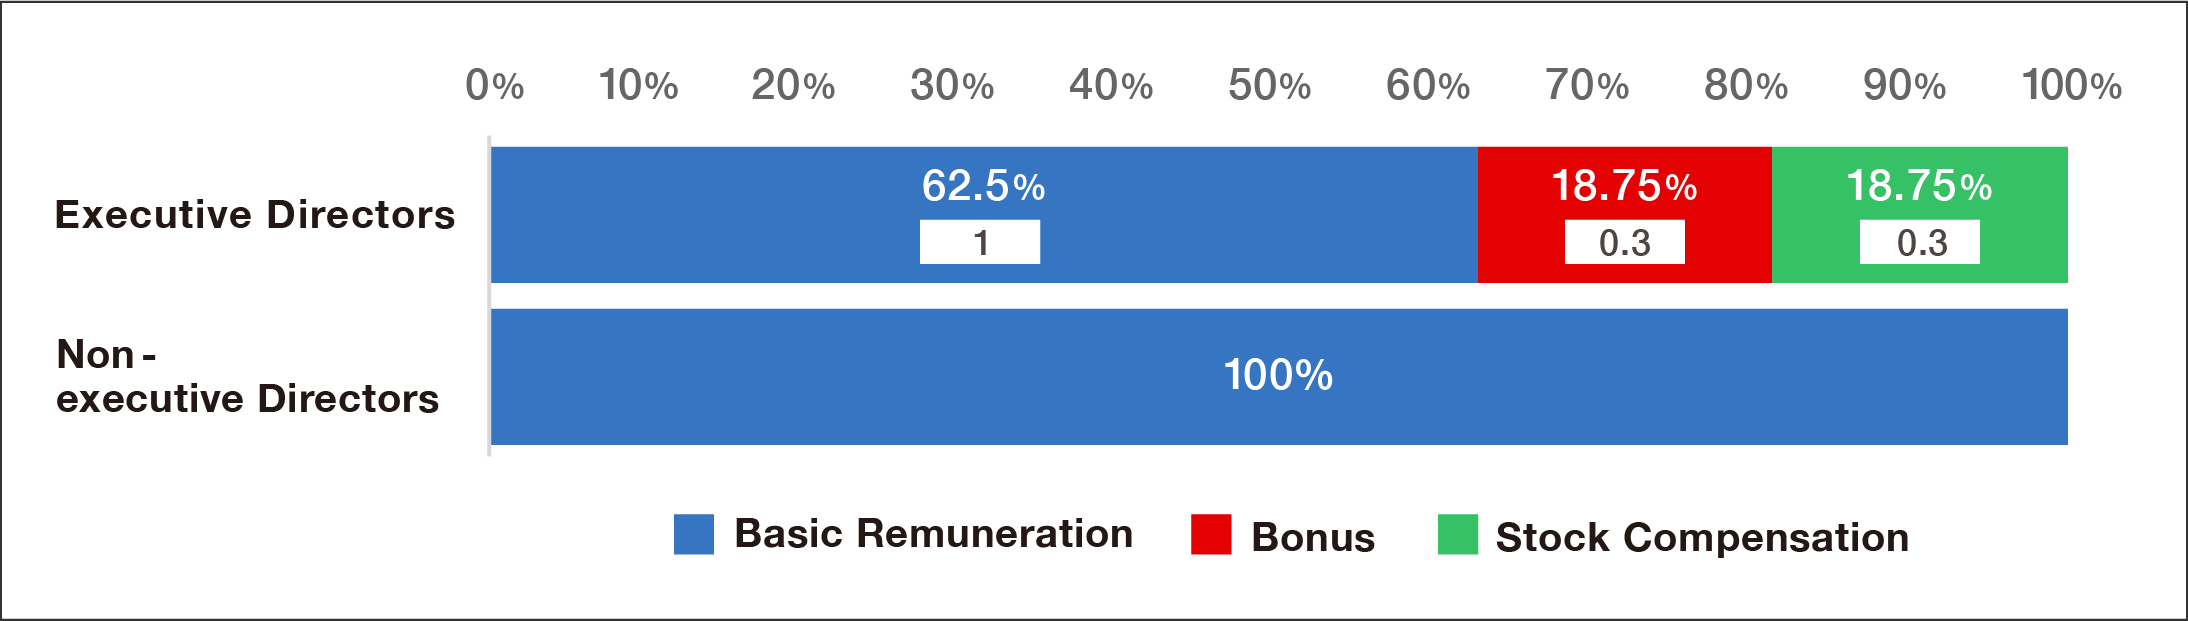 Composition of Remuneration